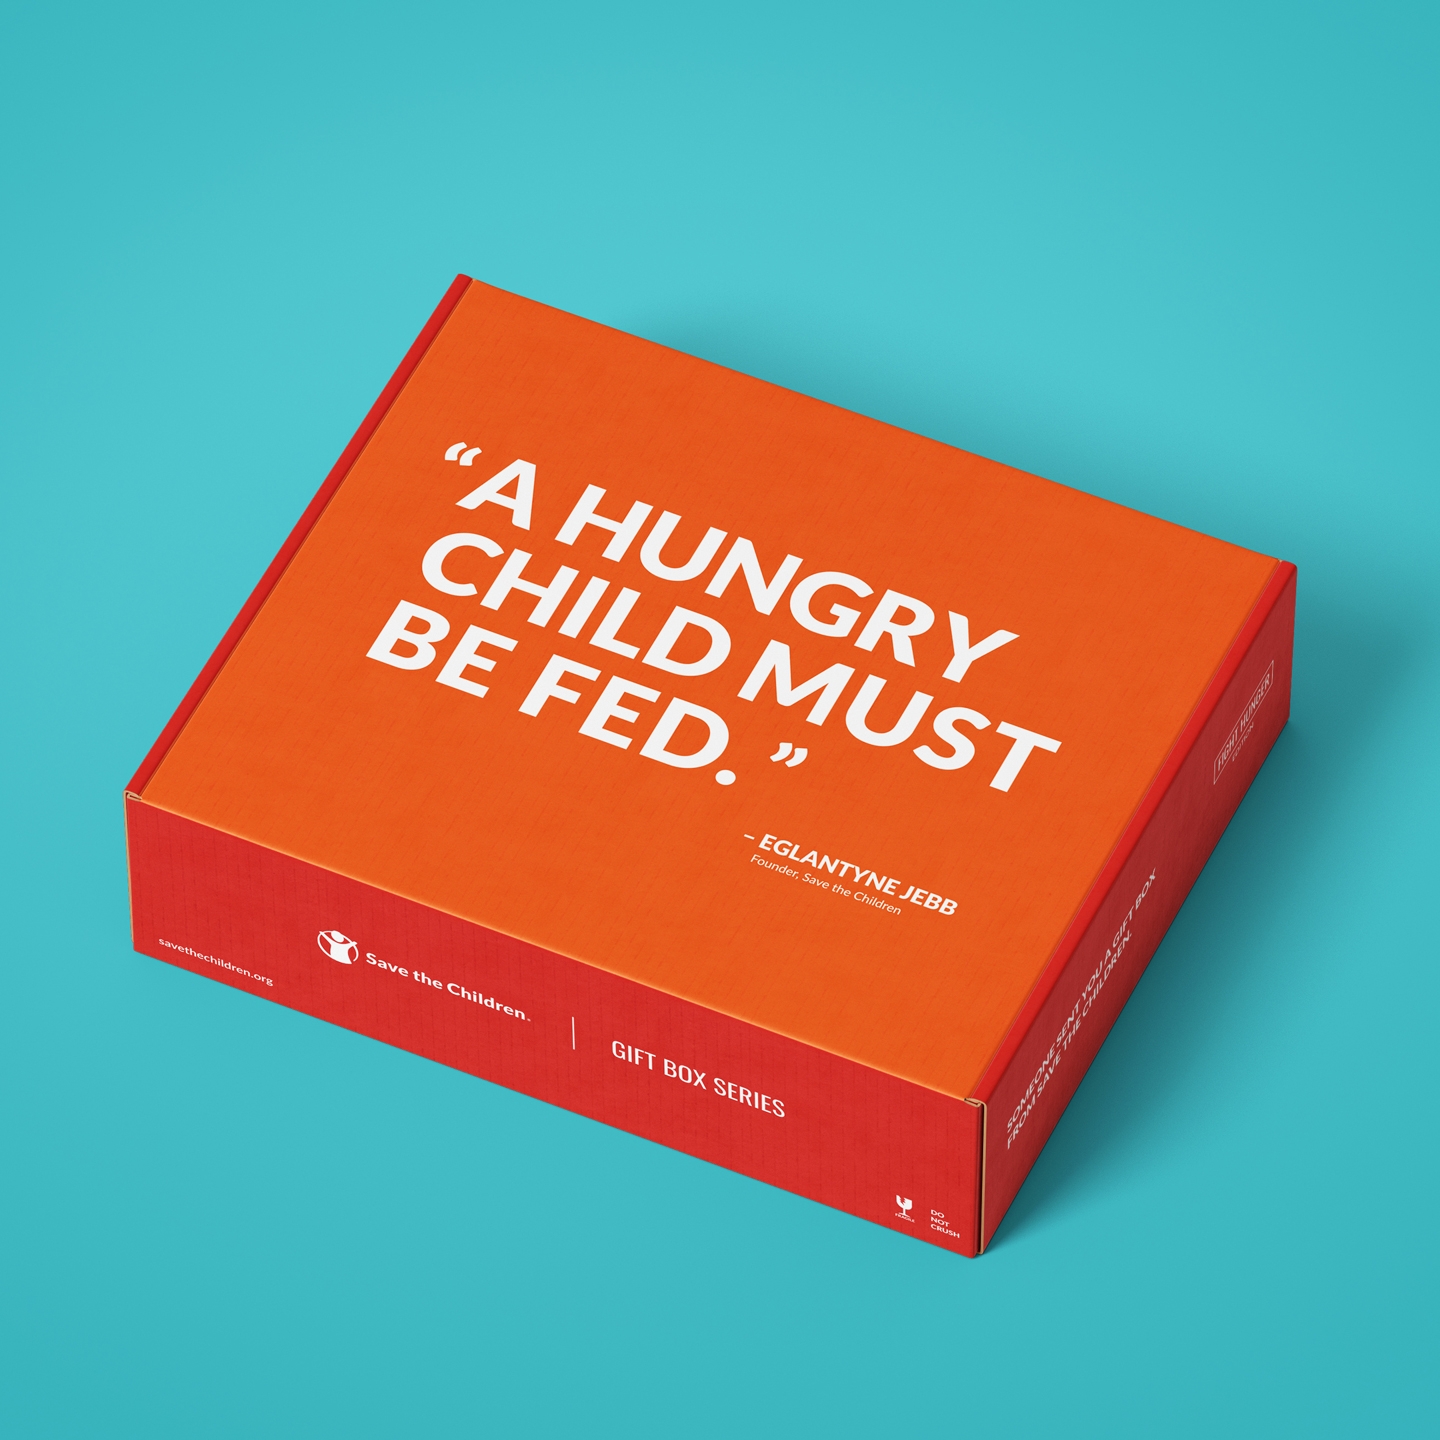 Gift Box that says: A Hungry Child Must Be Fed. - Eglantyne Jebb